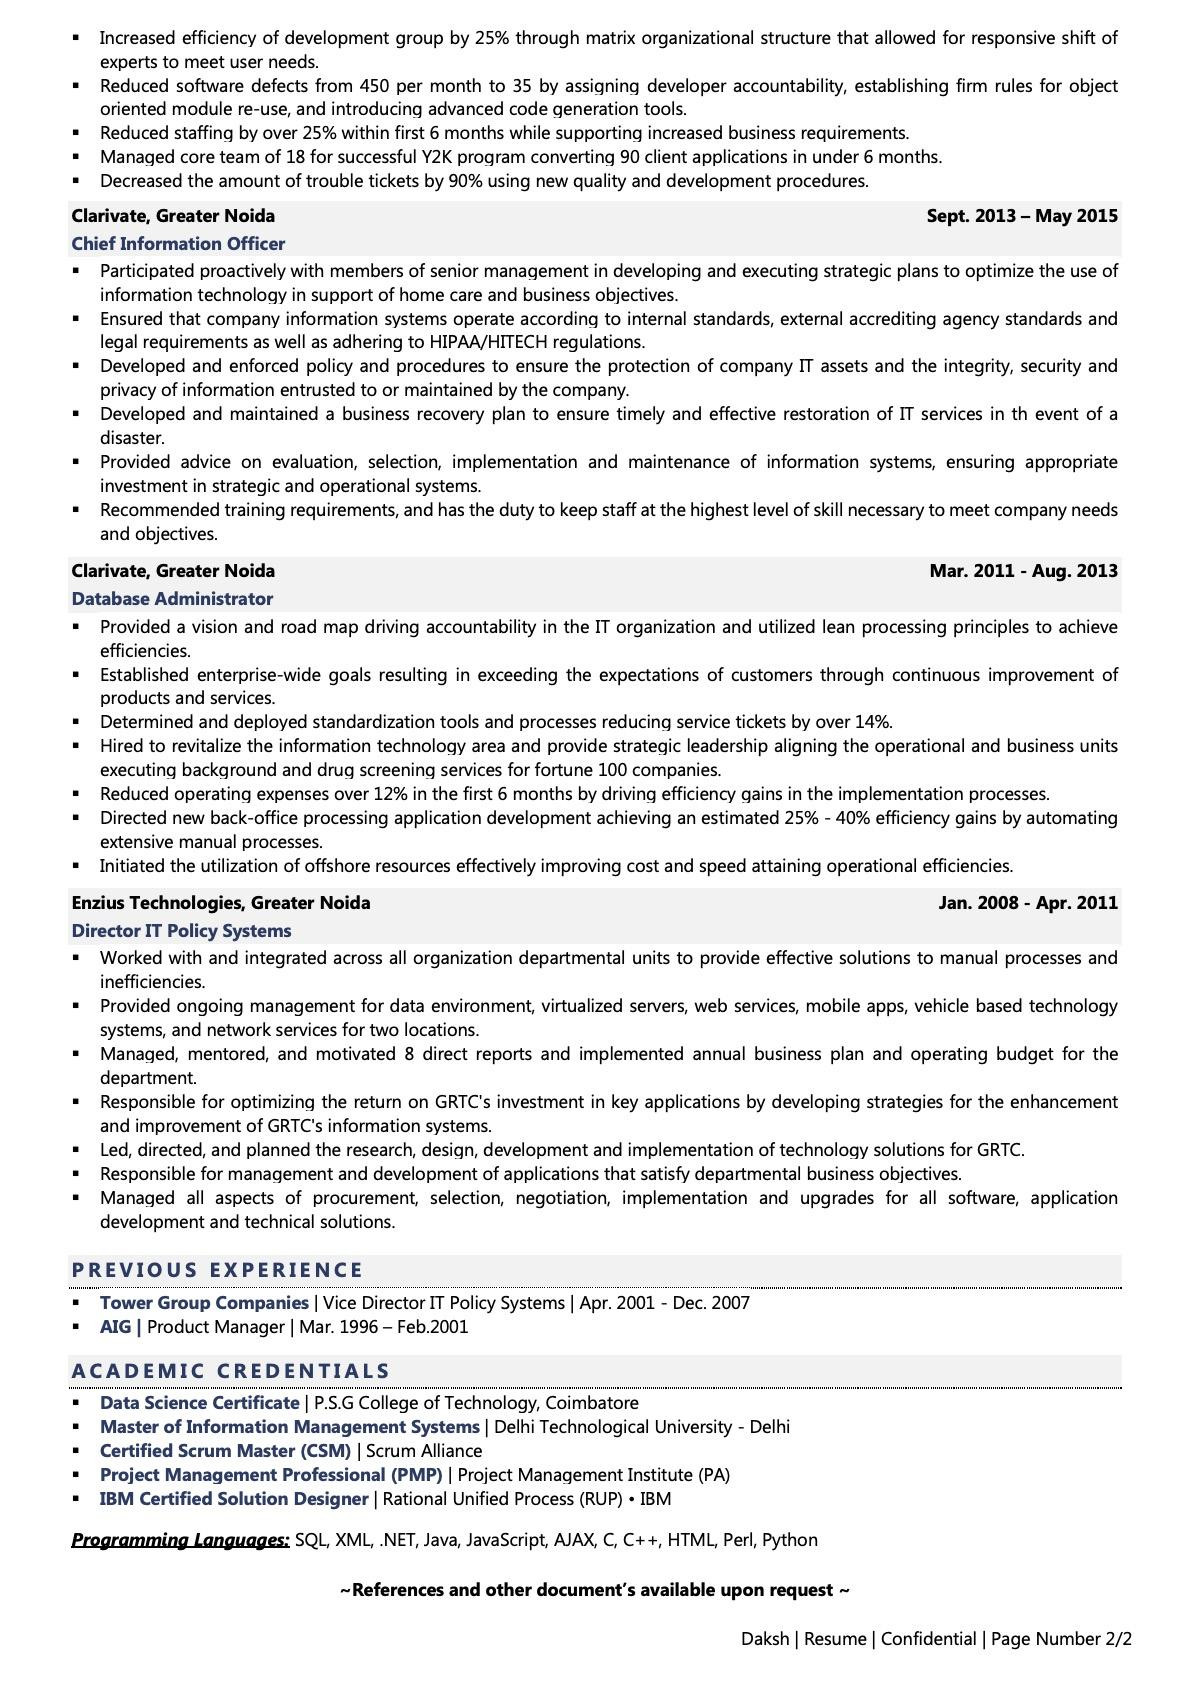 Sample Resume with Comp Tia Scredentials Cio Resume Examples & Template (with Job Winning Tips)